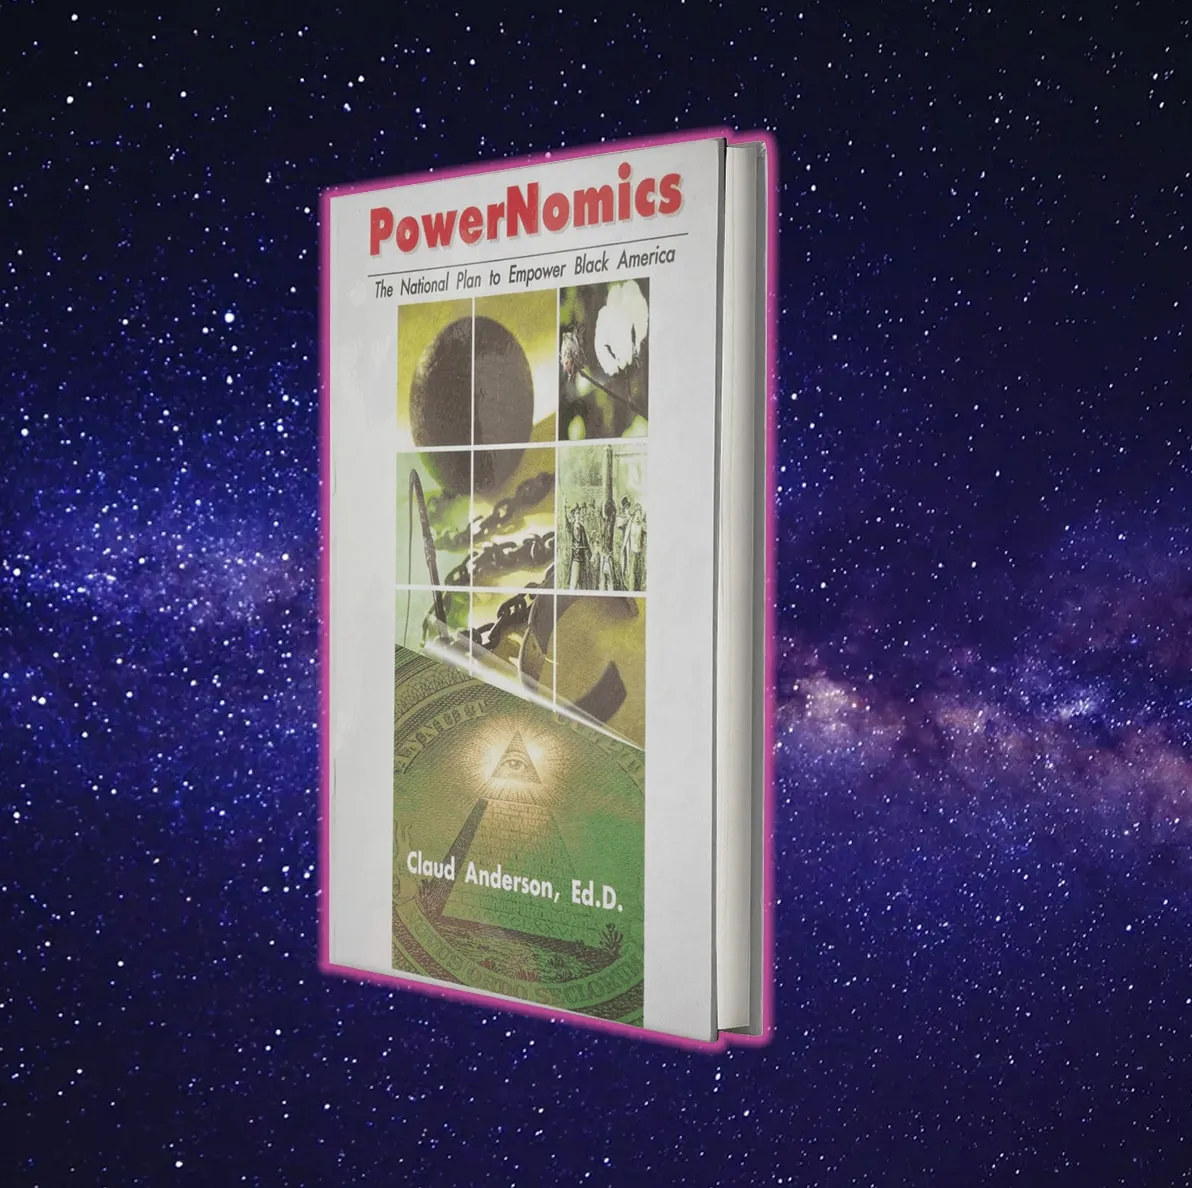 PowerNomics - The National Plan to Empower Black America by Claud Anderson, Ed.D.